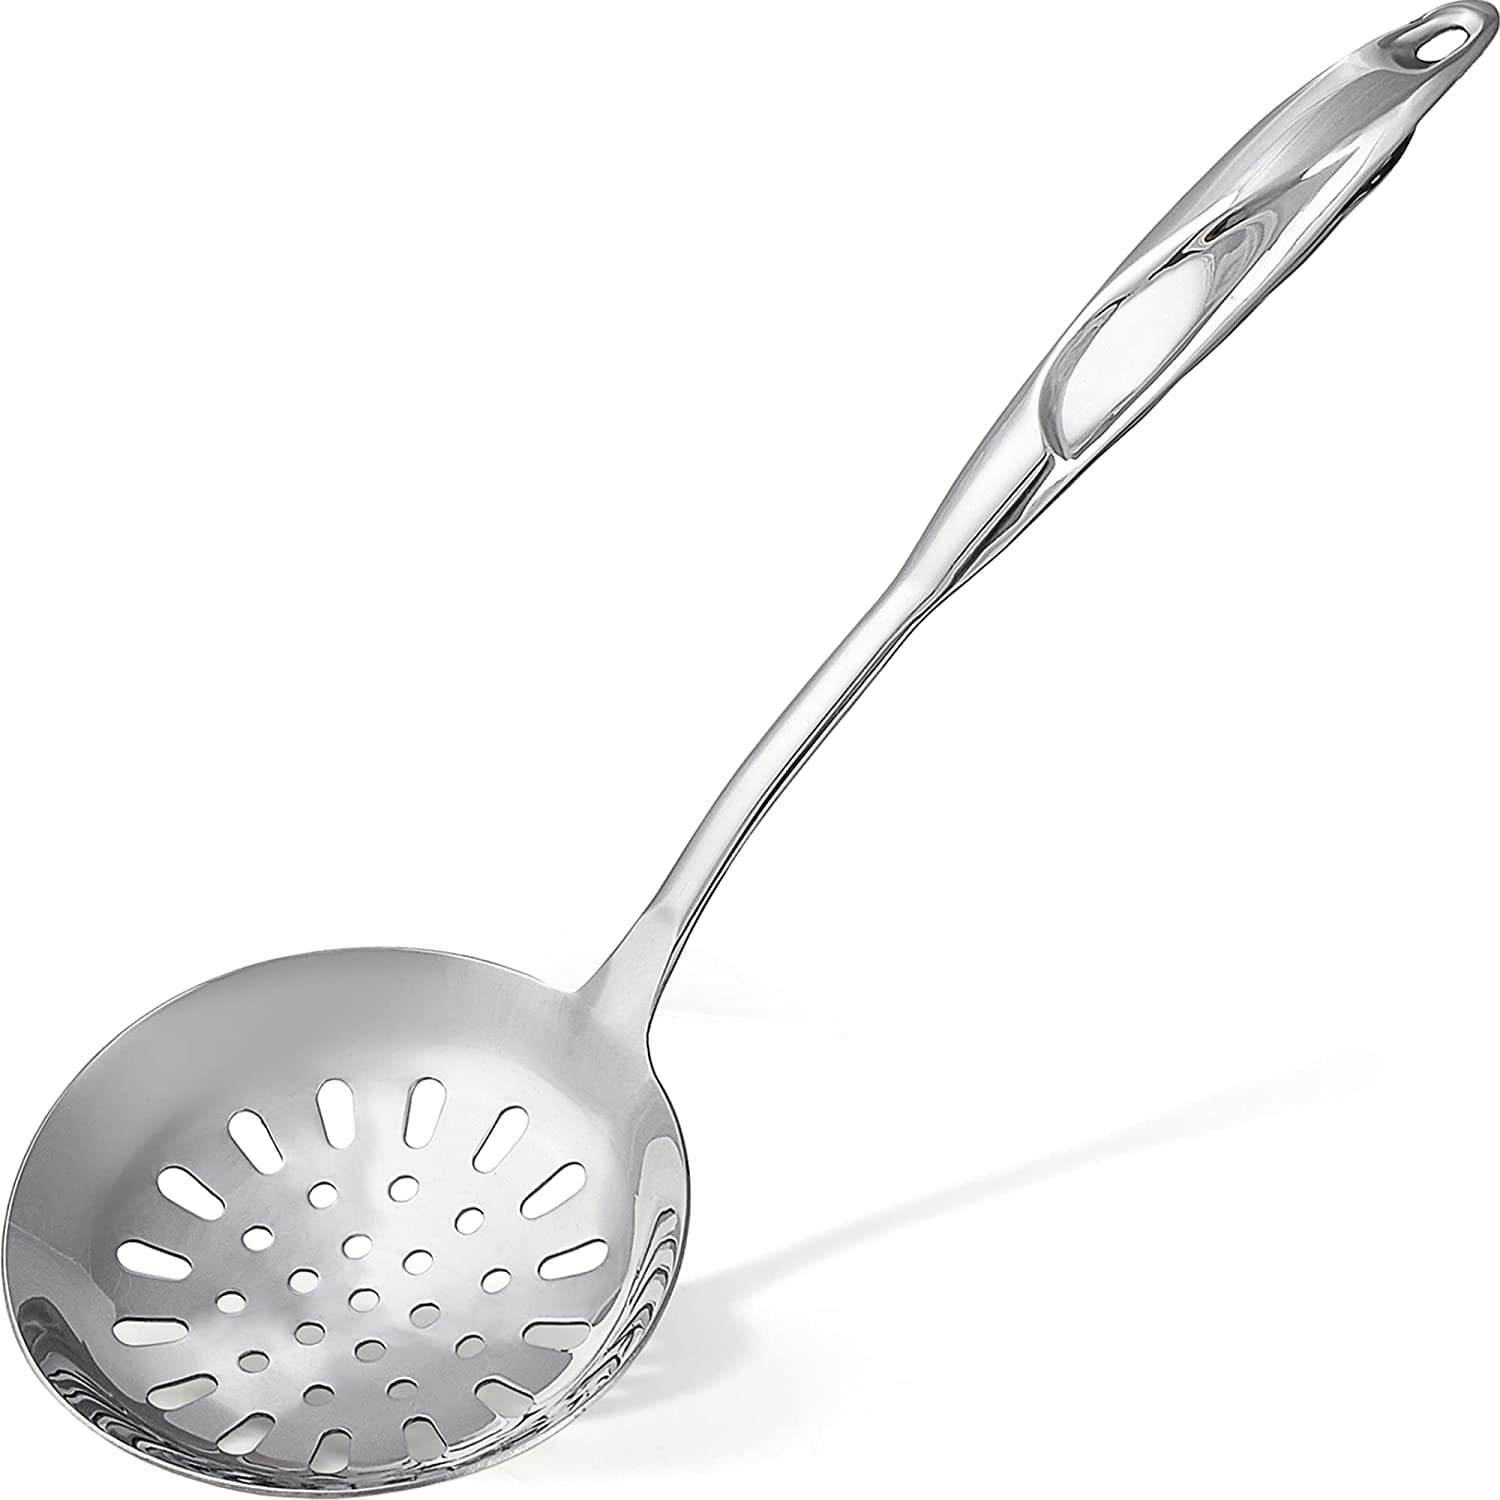 Stainless Steel Skimmer with Holding Spatula for Oil Frying, Cooking - 2054  - BULKMART - BULKMART - Online Shop for House Hold Items